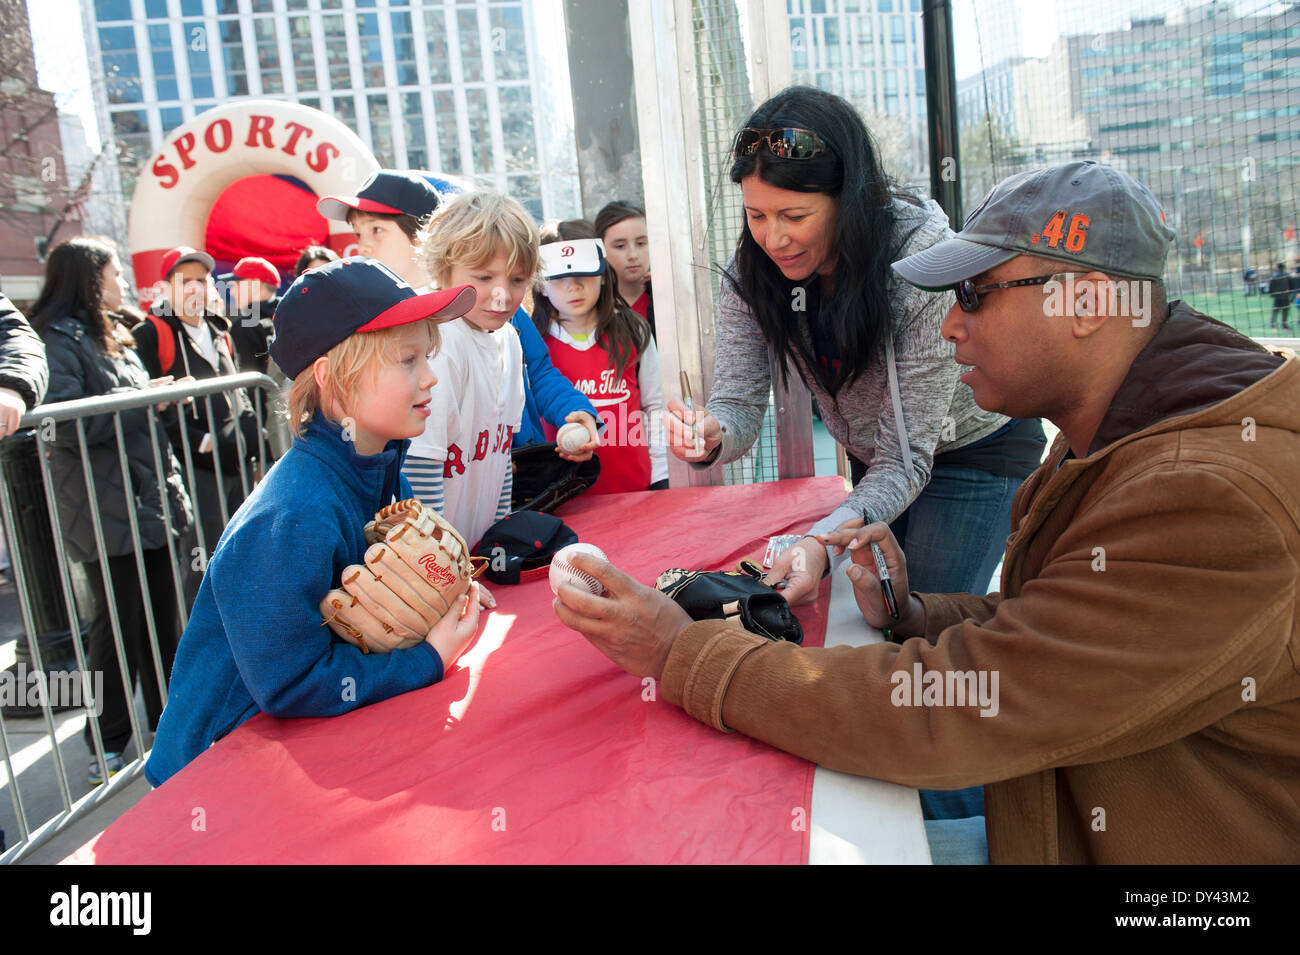 Bernie Williams, who played for the New York Yankees and was a World Series champion and All Star, signing autographs. Stock Photo